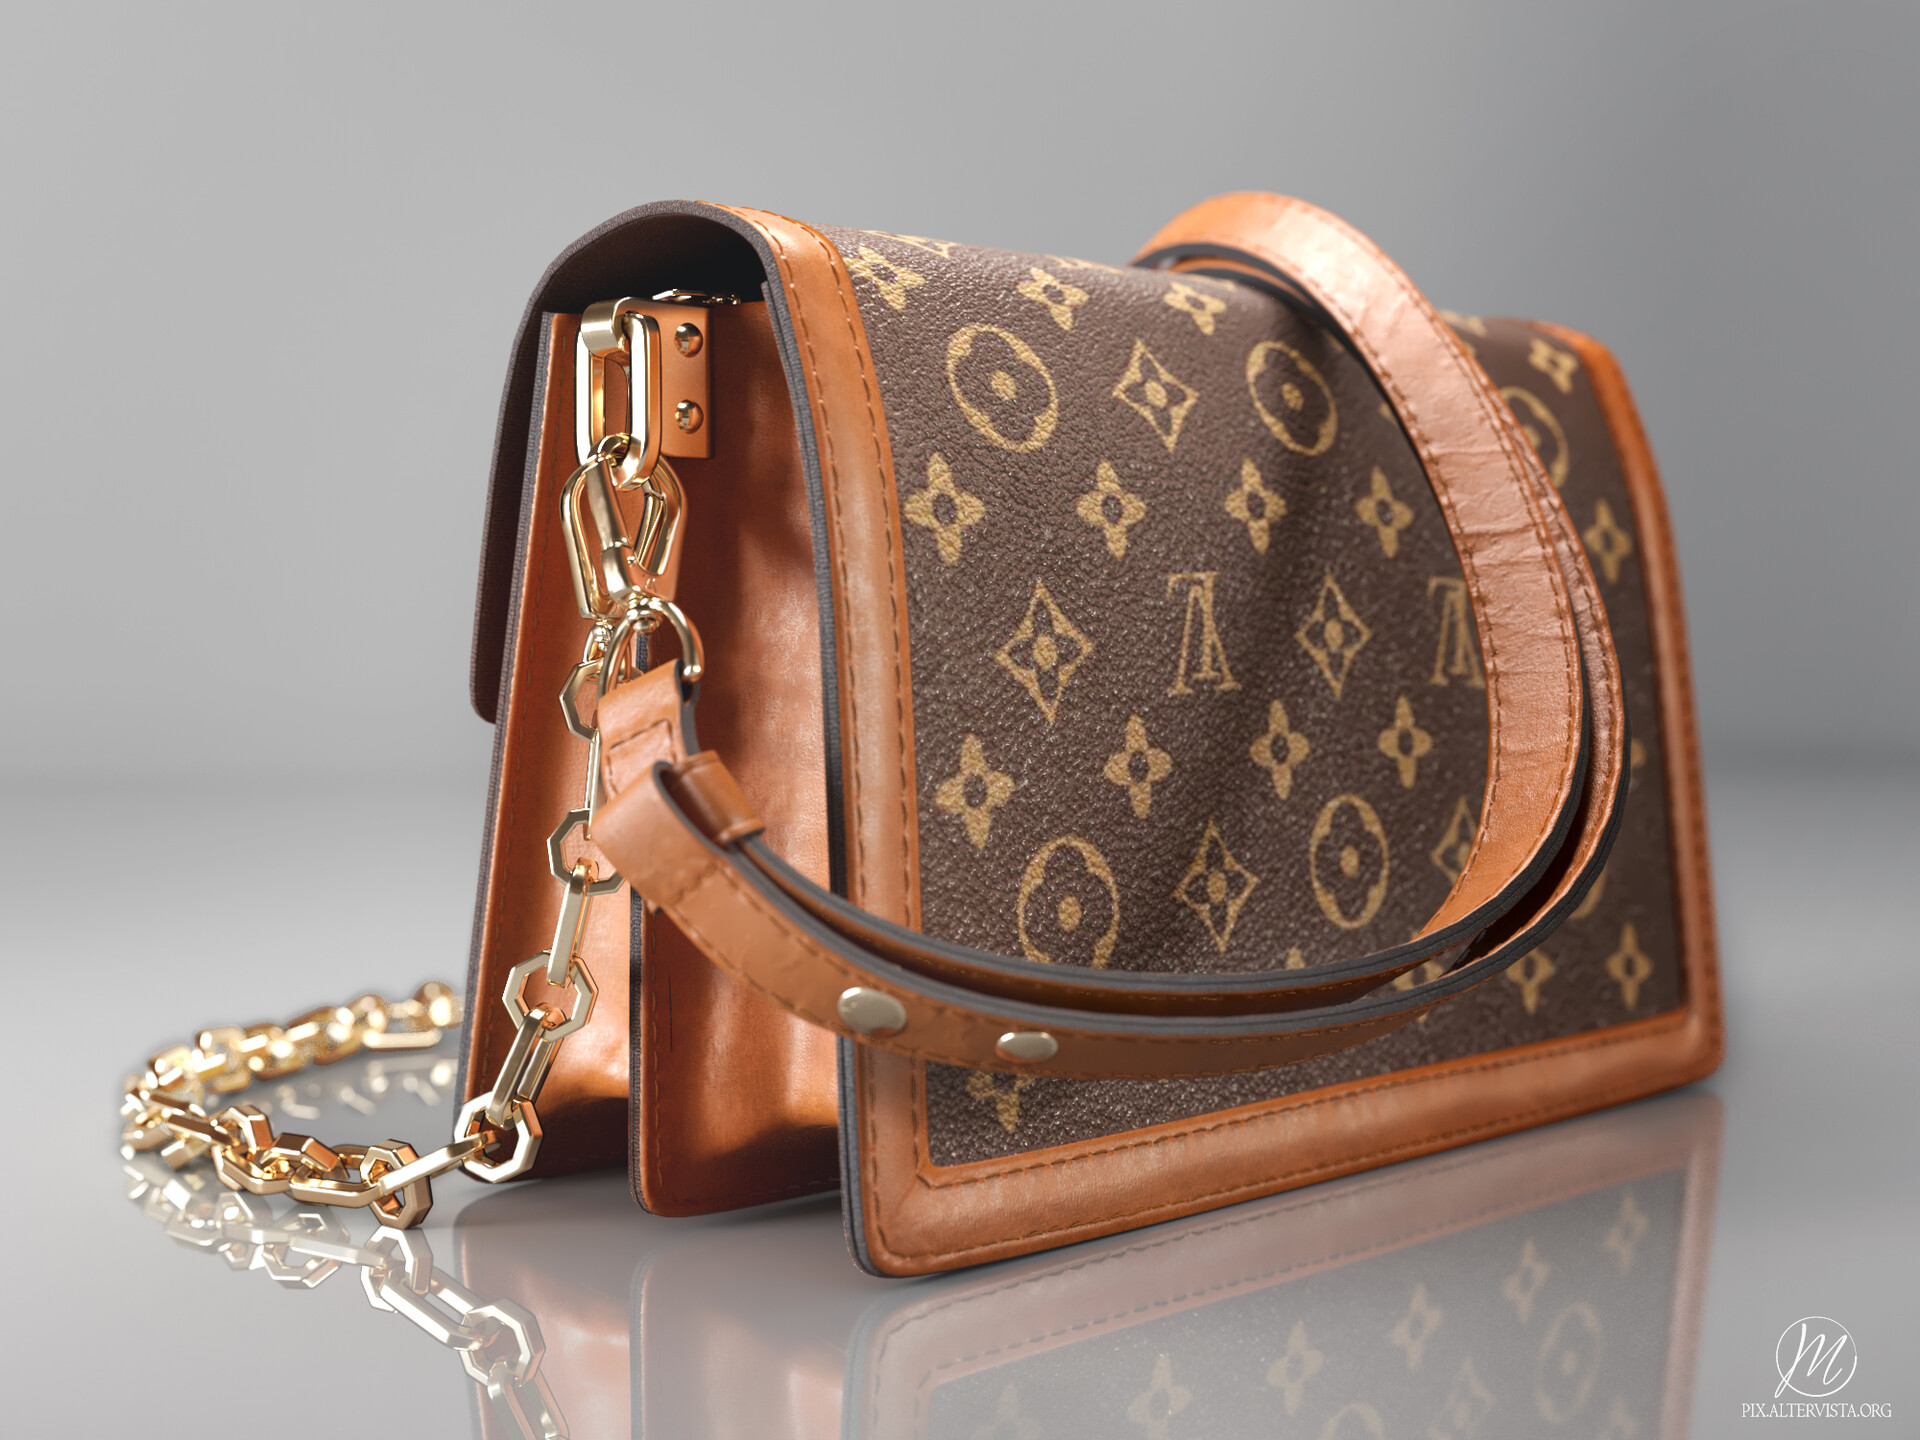 Try on Louis Vuitton Bag 💼, Gallery posted by Regienashael